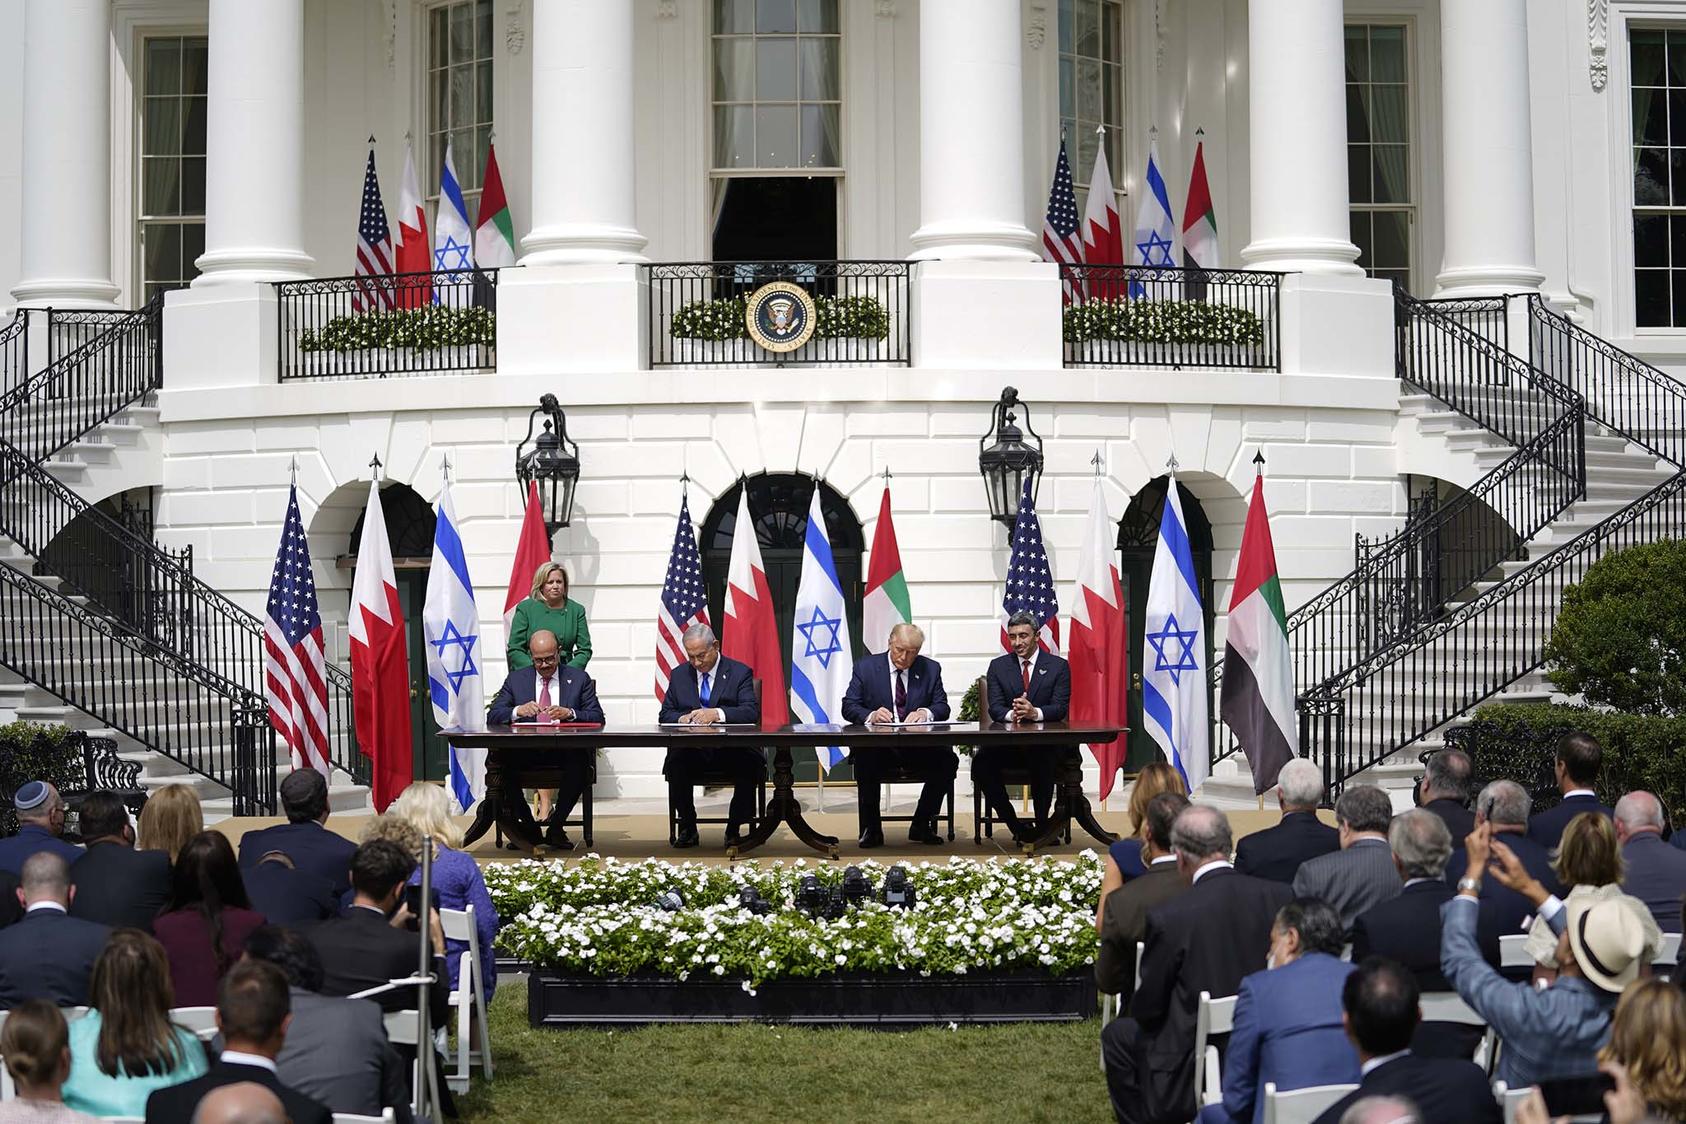 Representatives from Bahrain, Israel and the United Arab Emirates with President Trump during a signing ceremony for normalization agreements between Israel and the Arab states, Sept. 15, 2020. (Doug Mills/The New York Times)